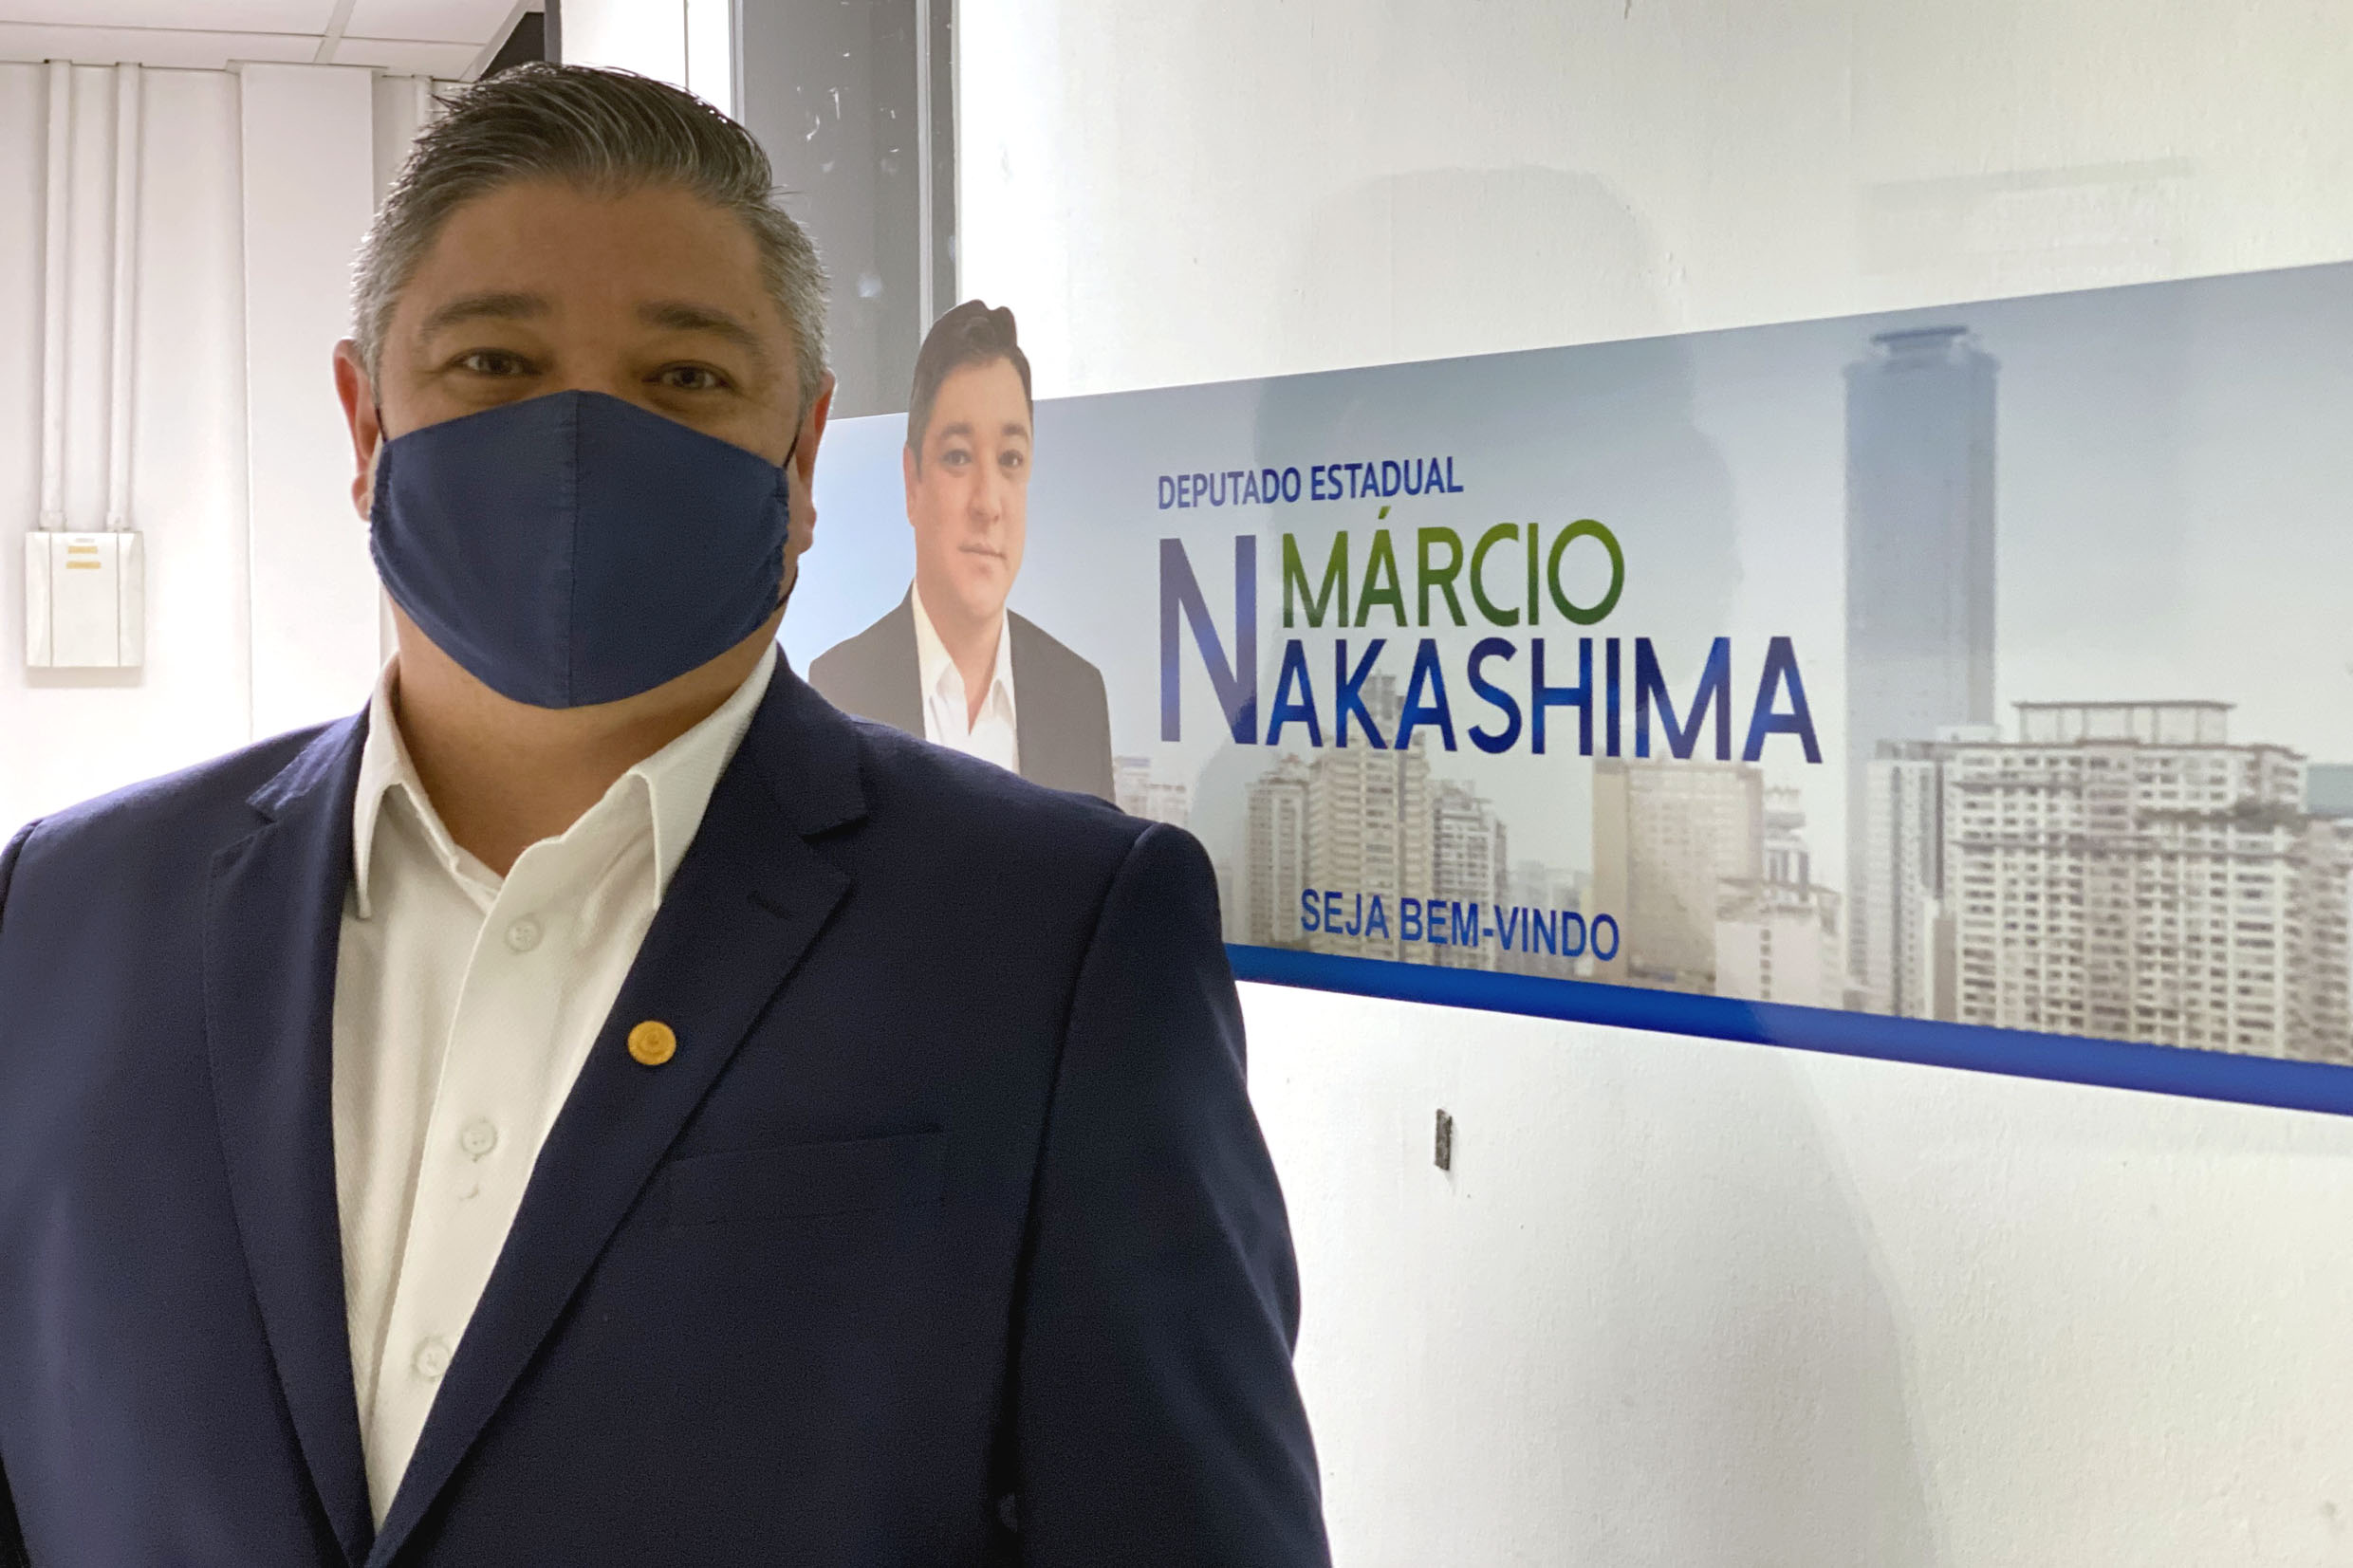 Márcio Nakashima<a style='float:right' href='https://www3.al.sp.gov.br/repositorio/noticia/N-02-2022/fg281621.jpg' target=_blank><img src='/_img/material-file-download-white.png' width='14px' alt='Clique para baixar a imagem'></a>